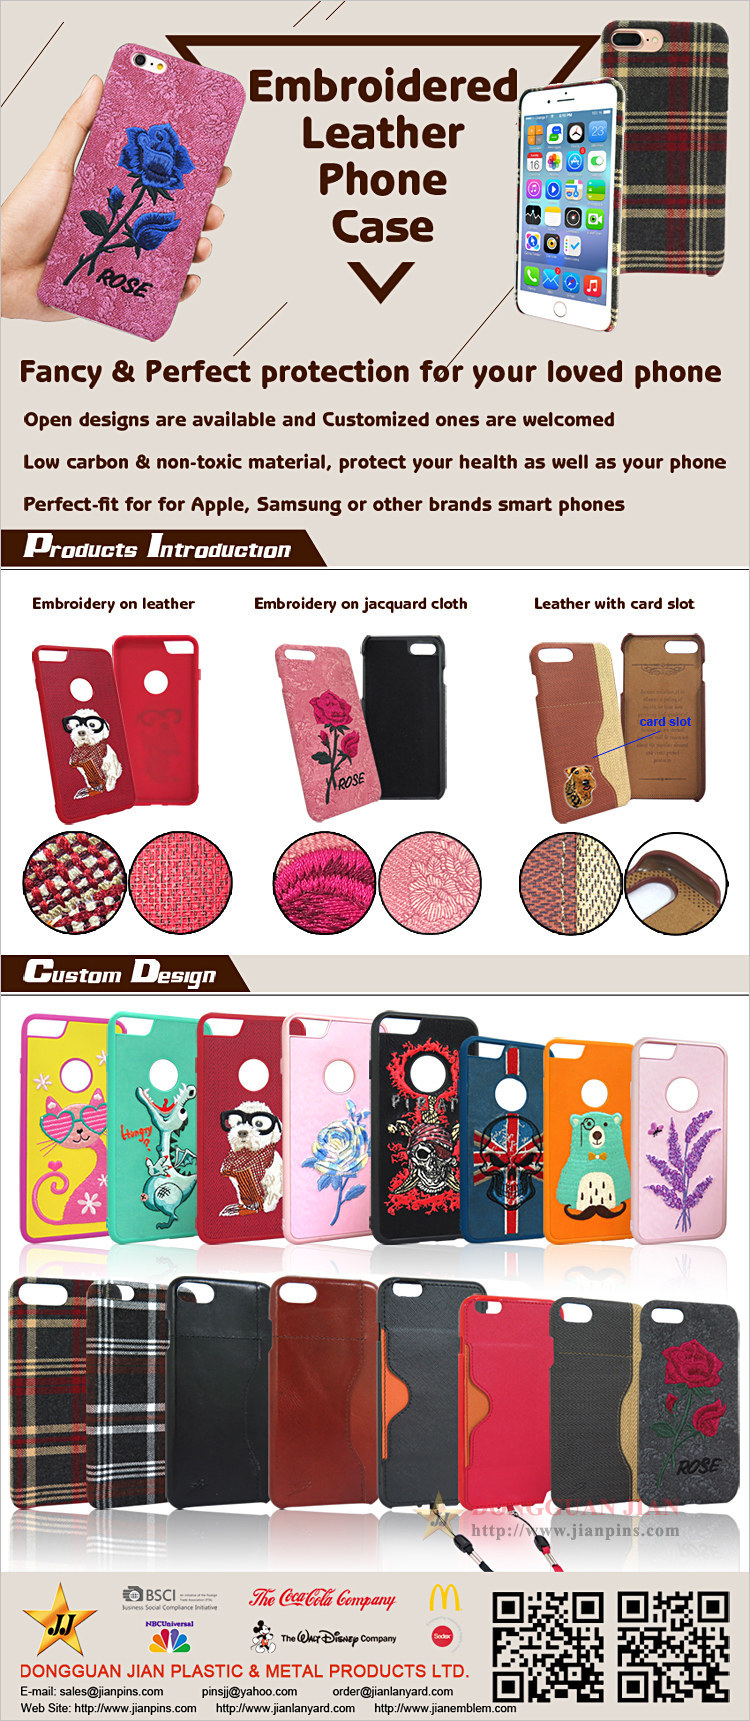 Fancy Embroidered Leather Cell Phone Cases